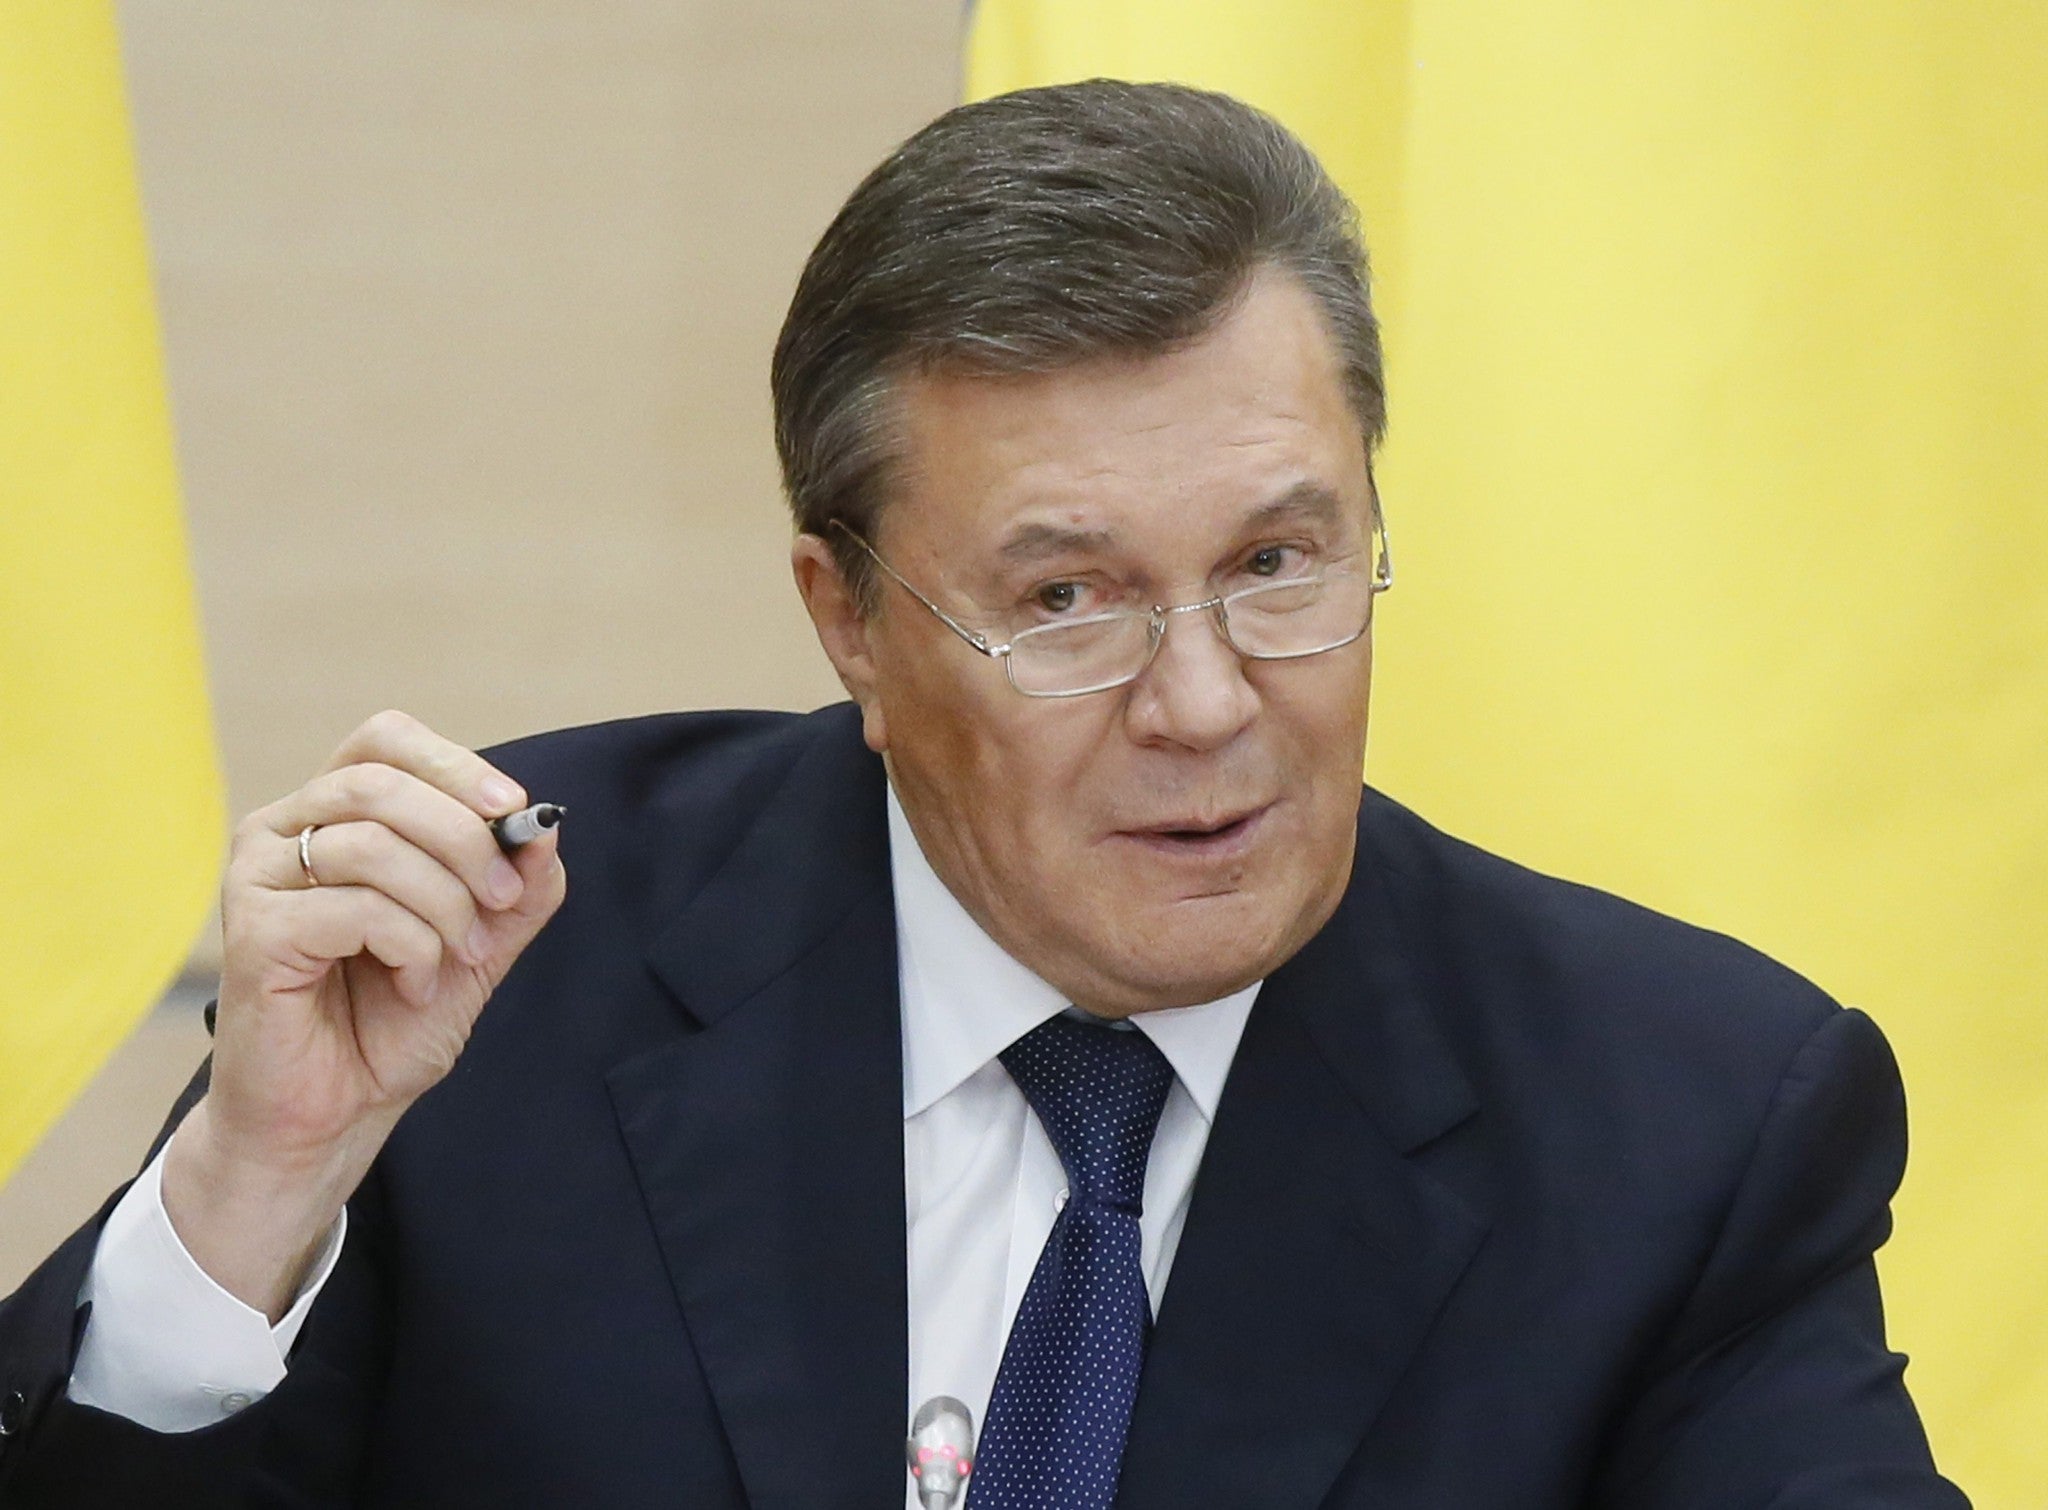 Former Ukrainian president Viktor Yanukovych speaks during his press conference in Rostov, Russia 28 February 2014. Making his first public appearance since being ousted, he told the news confeence he would fight for his country and insisted he was 'not o